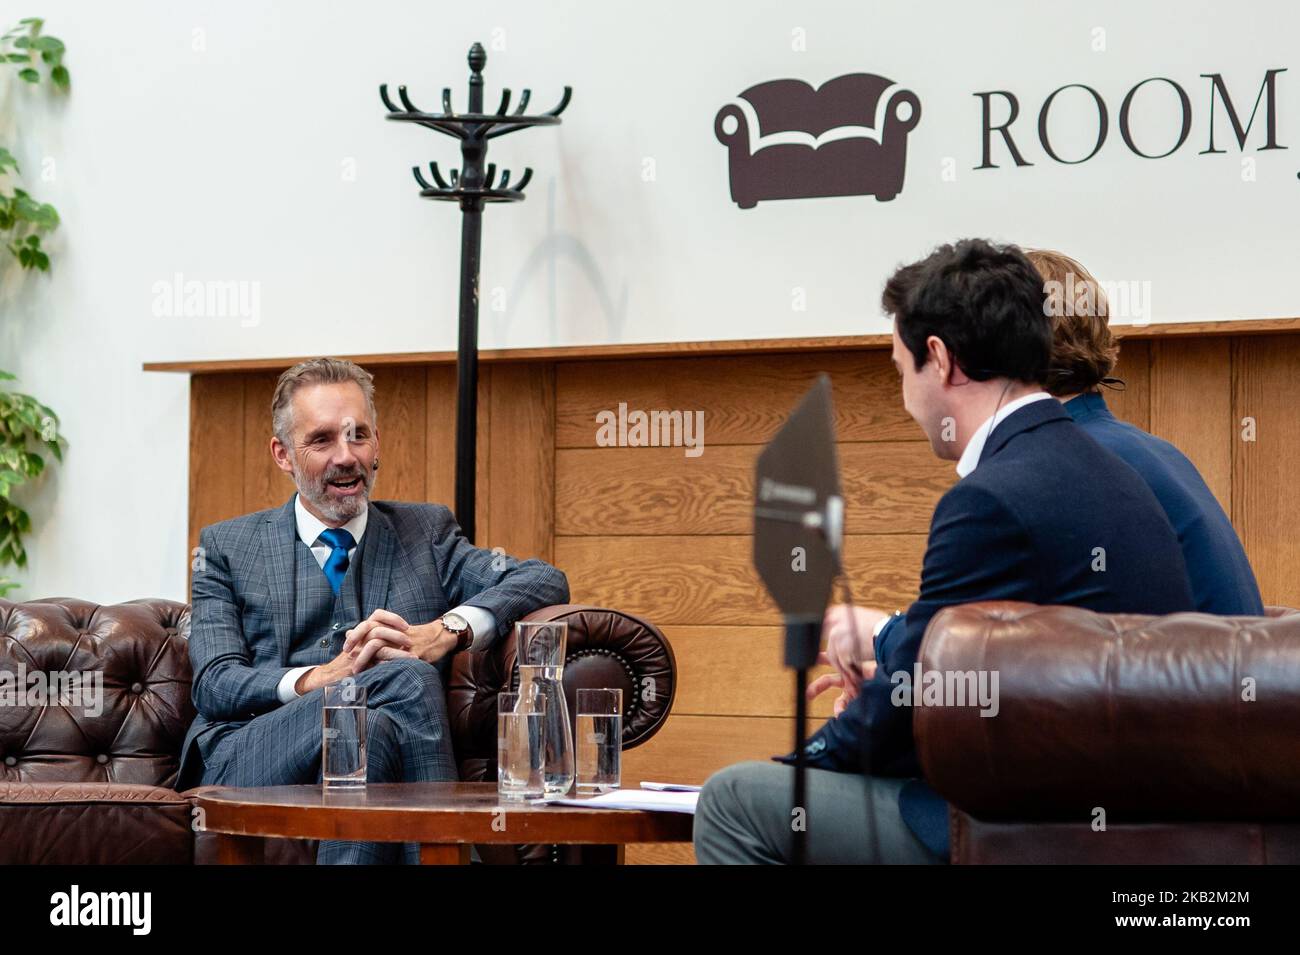 Interview with Jordan B. Peterson in Amsterdam, on October 31, 2018.. Dr.  Jordan B Peterson is a Professor of Psychology at the University of  Toronto, a clinical psychologist, a public speaker, and